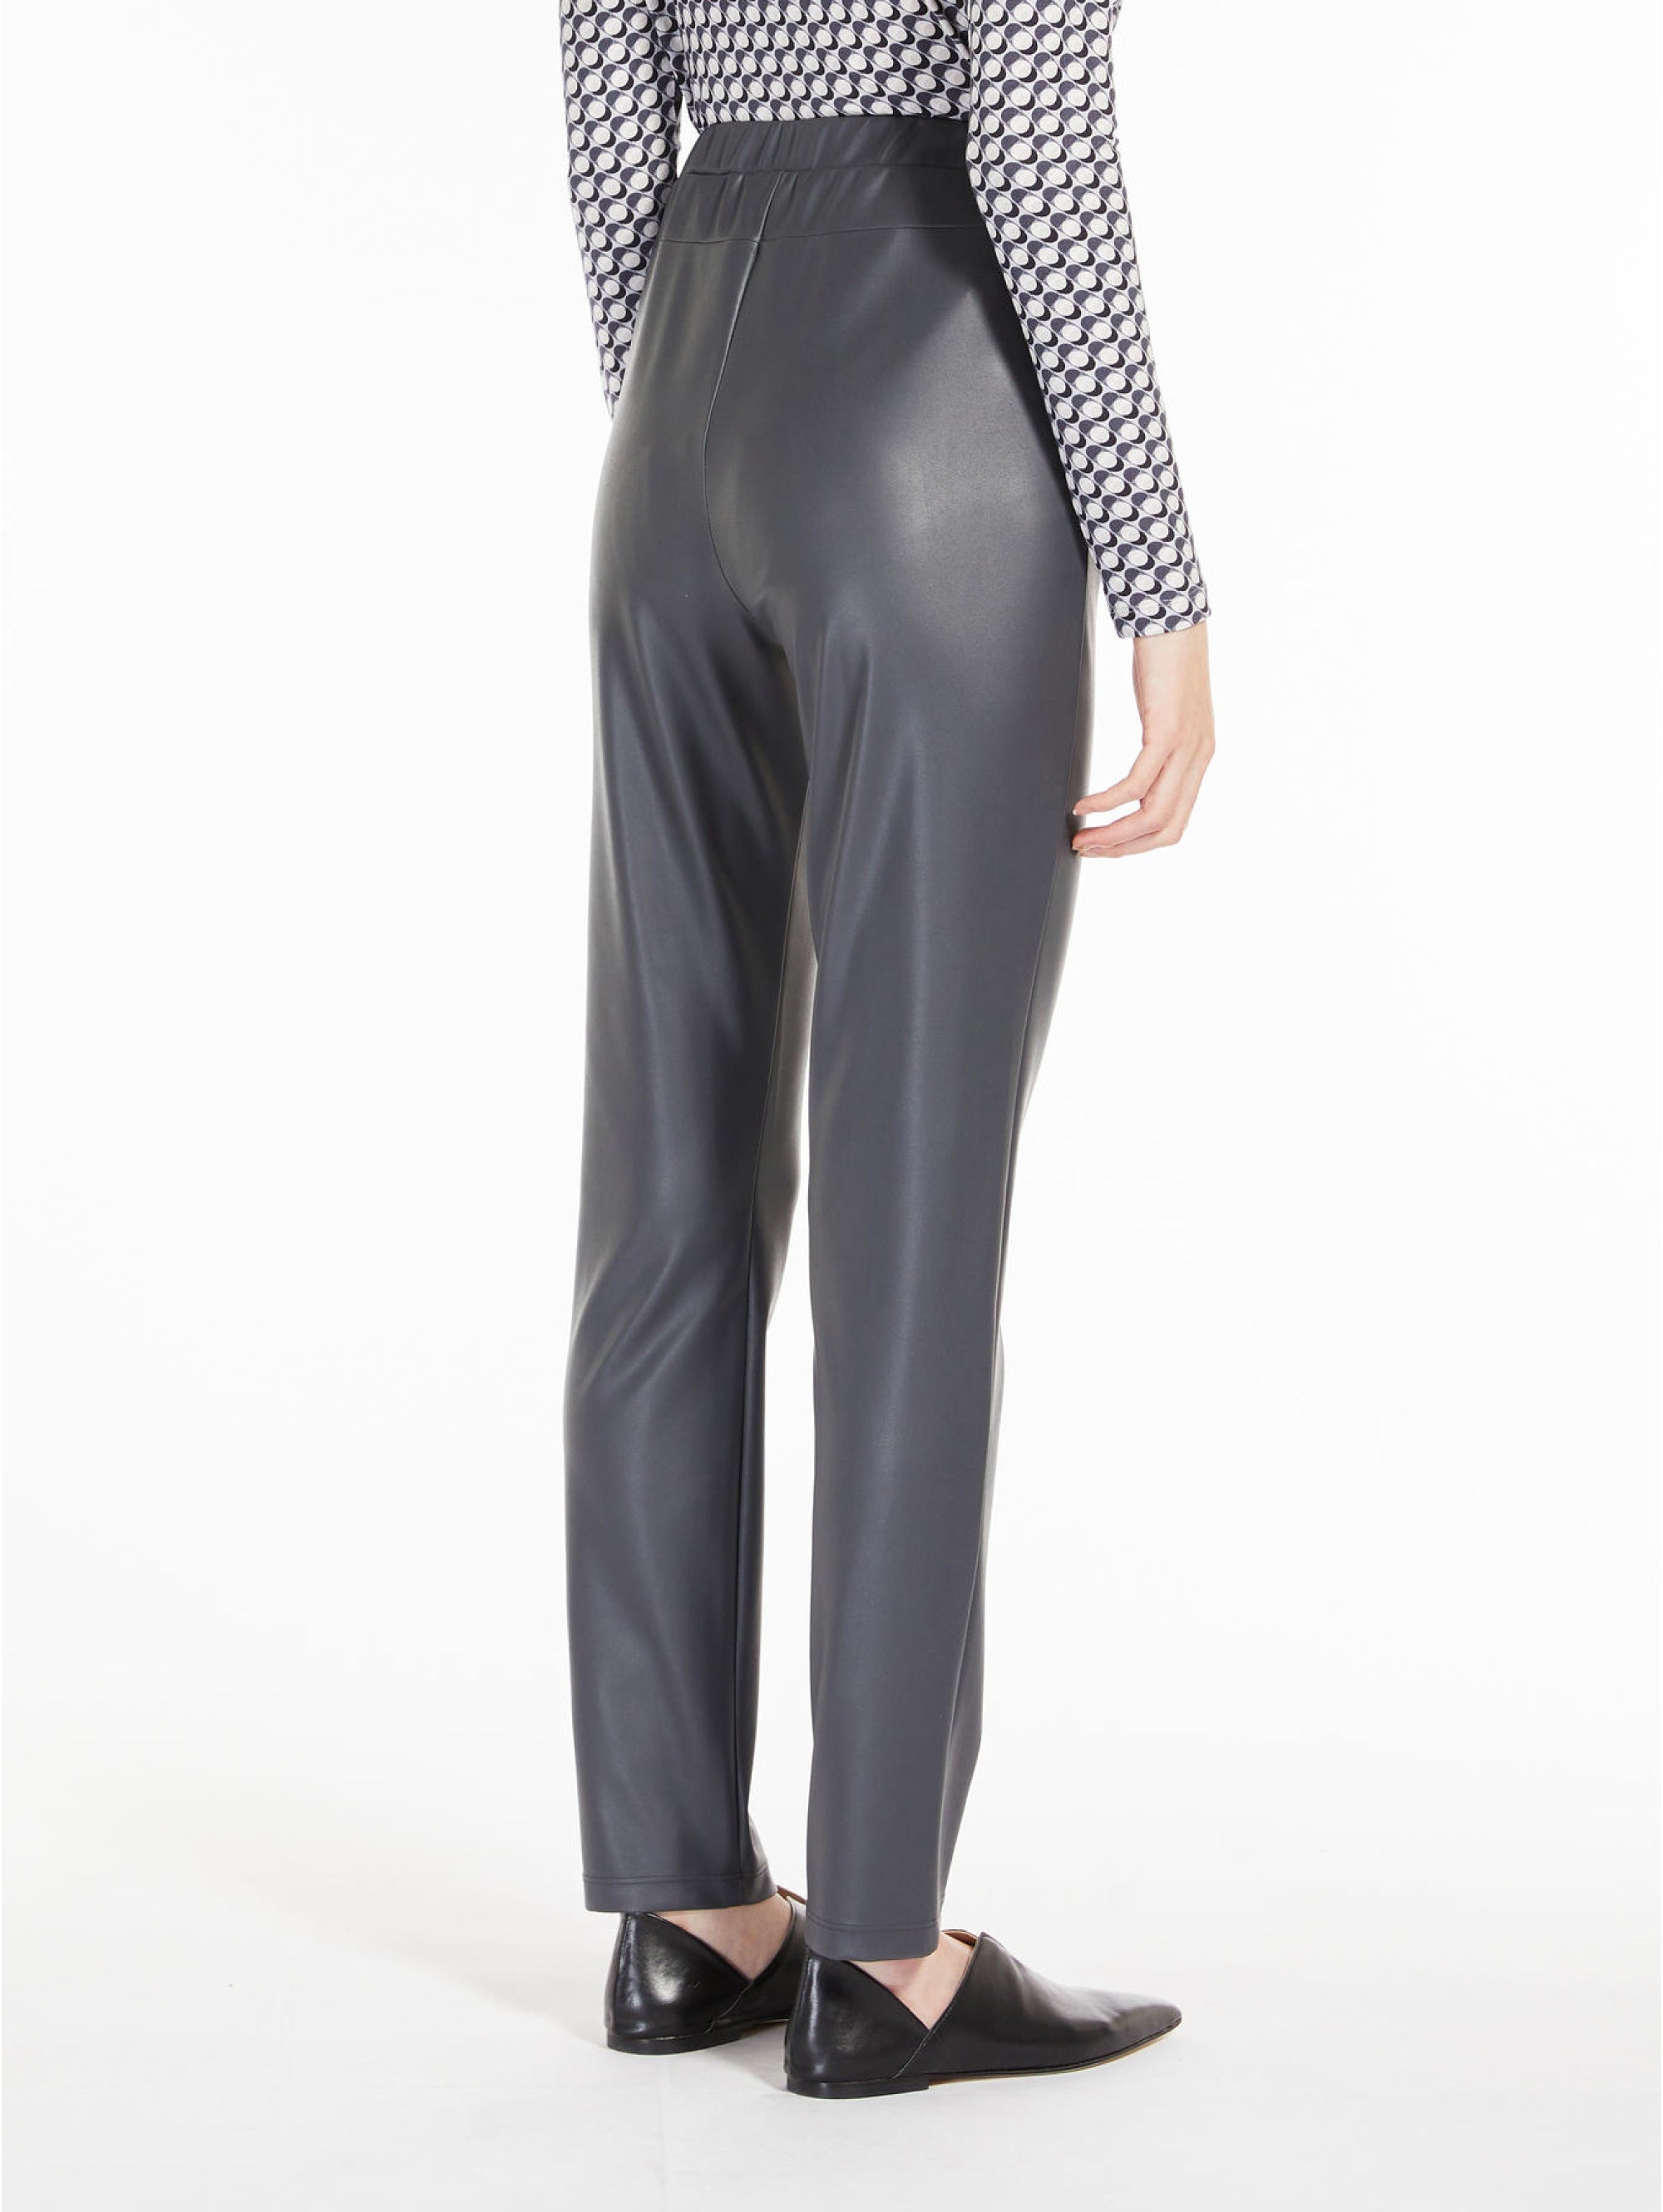 Gray coated jersey trousers